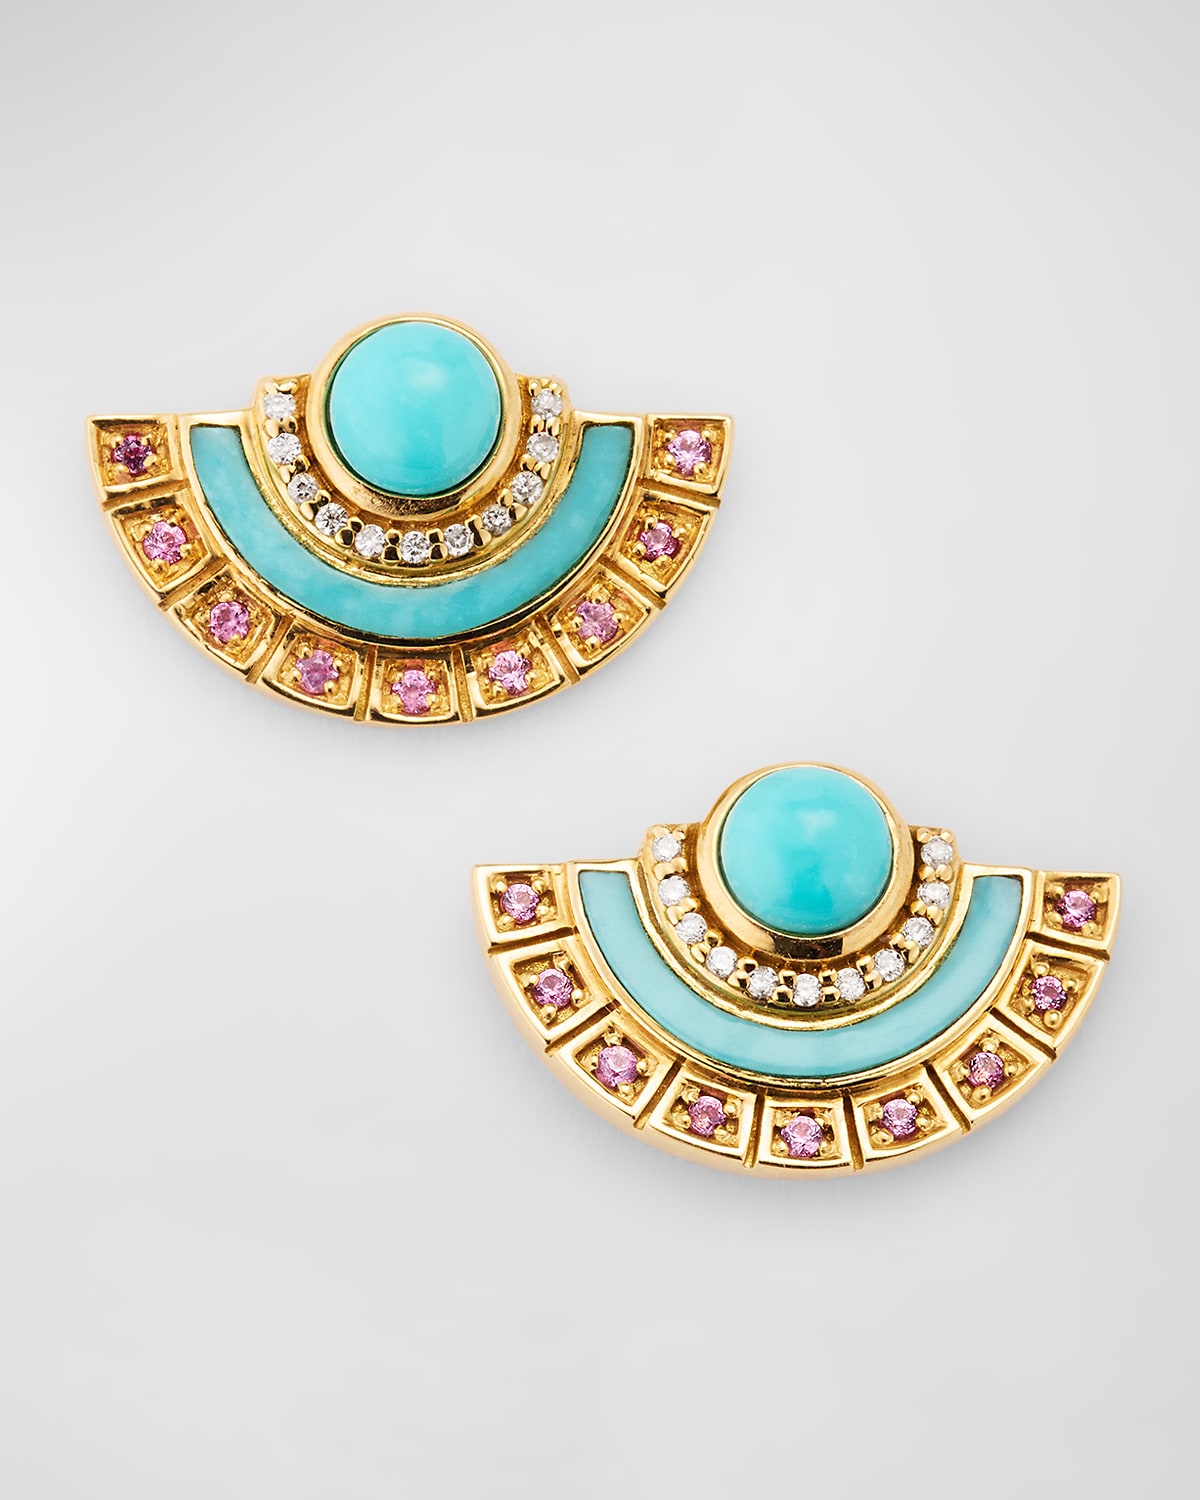 18K Yellow Gold Stud Earrings with Turquoise, Pink Sapphires and GH-SI Diamonds